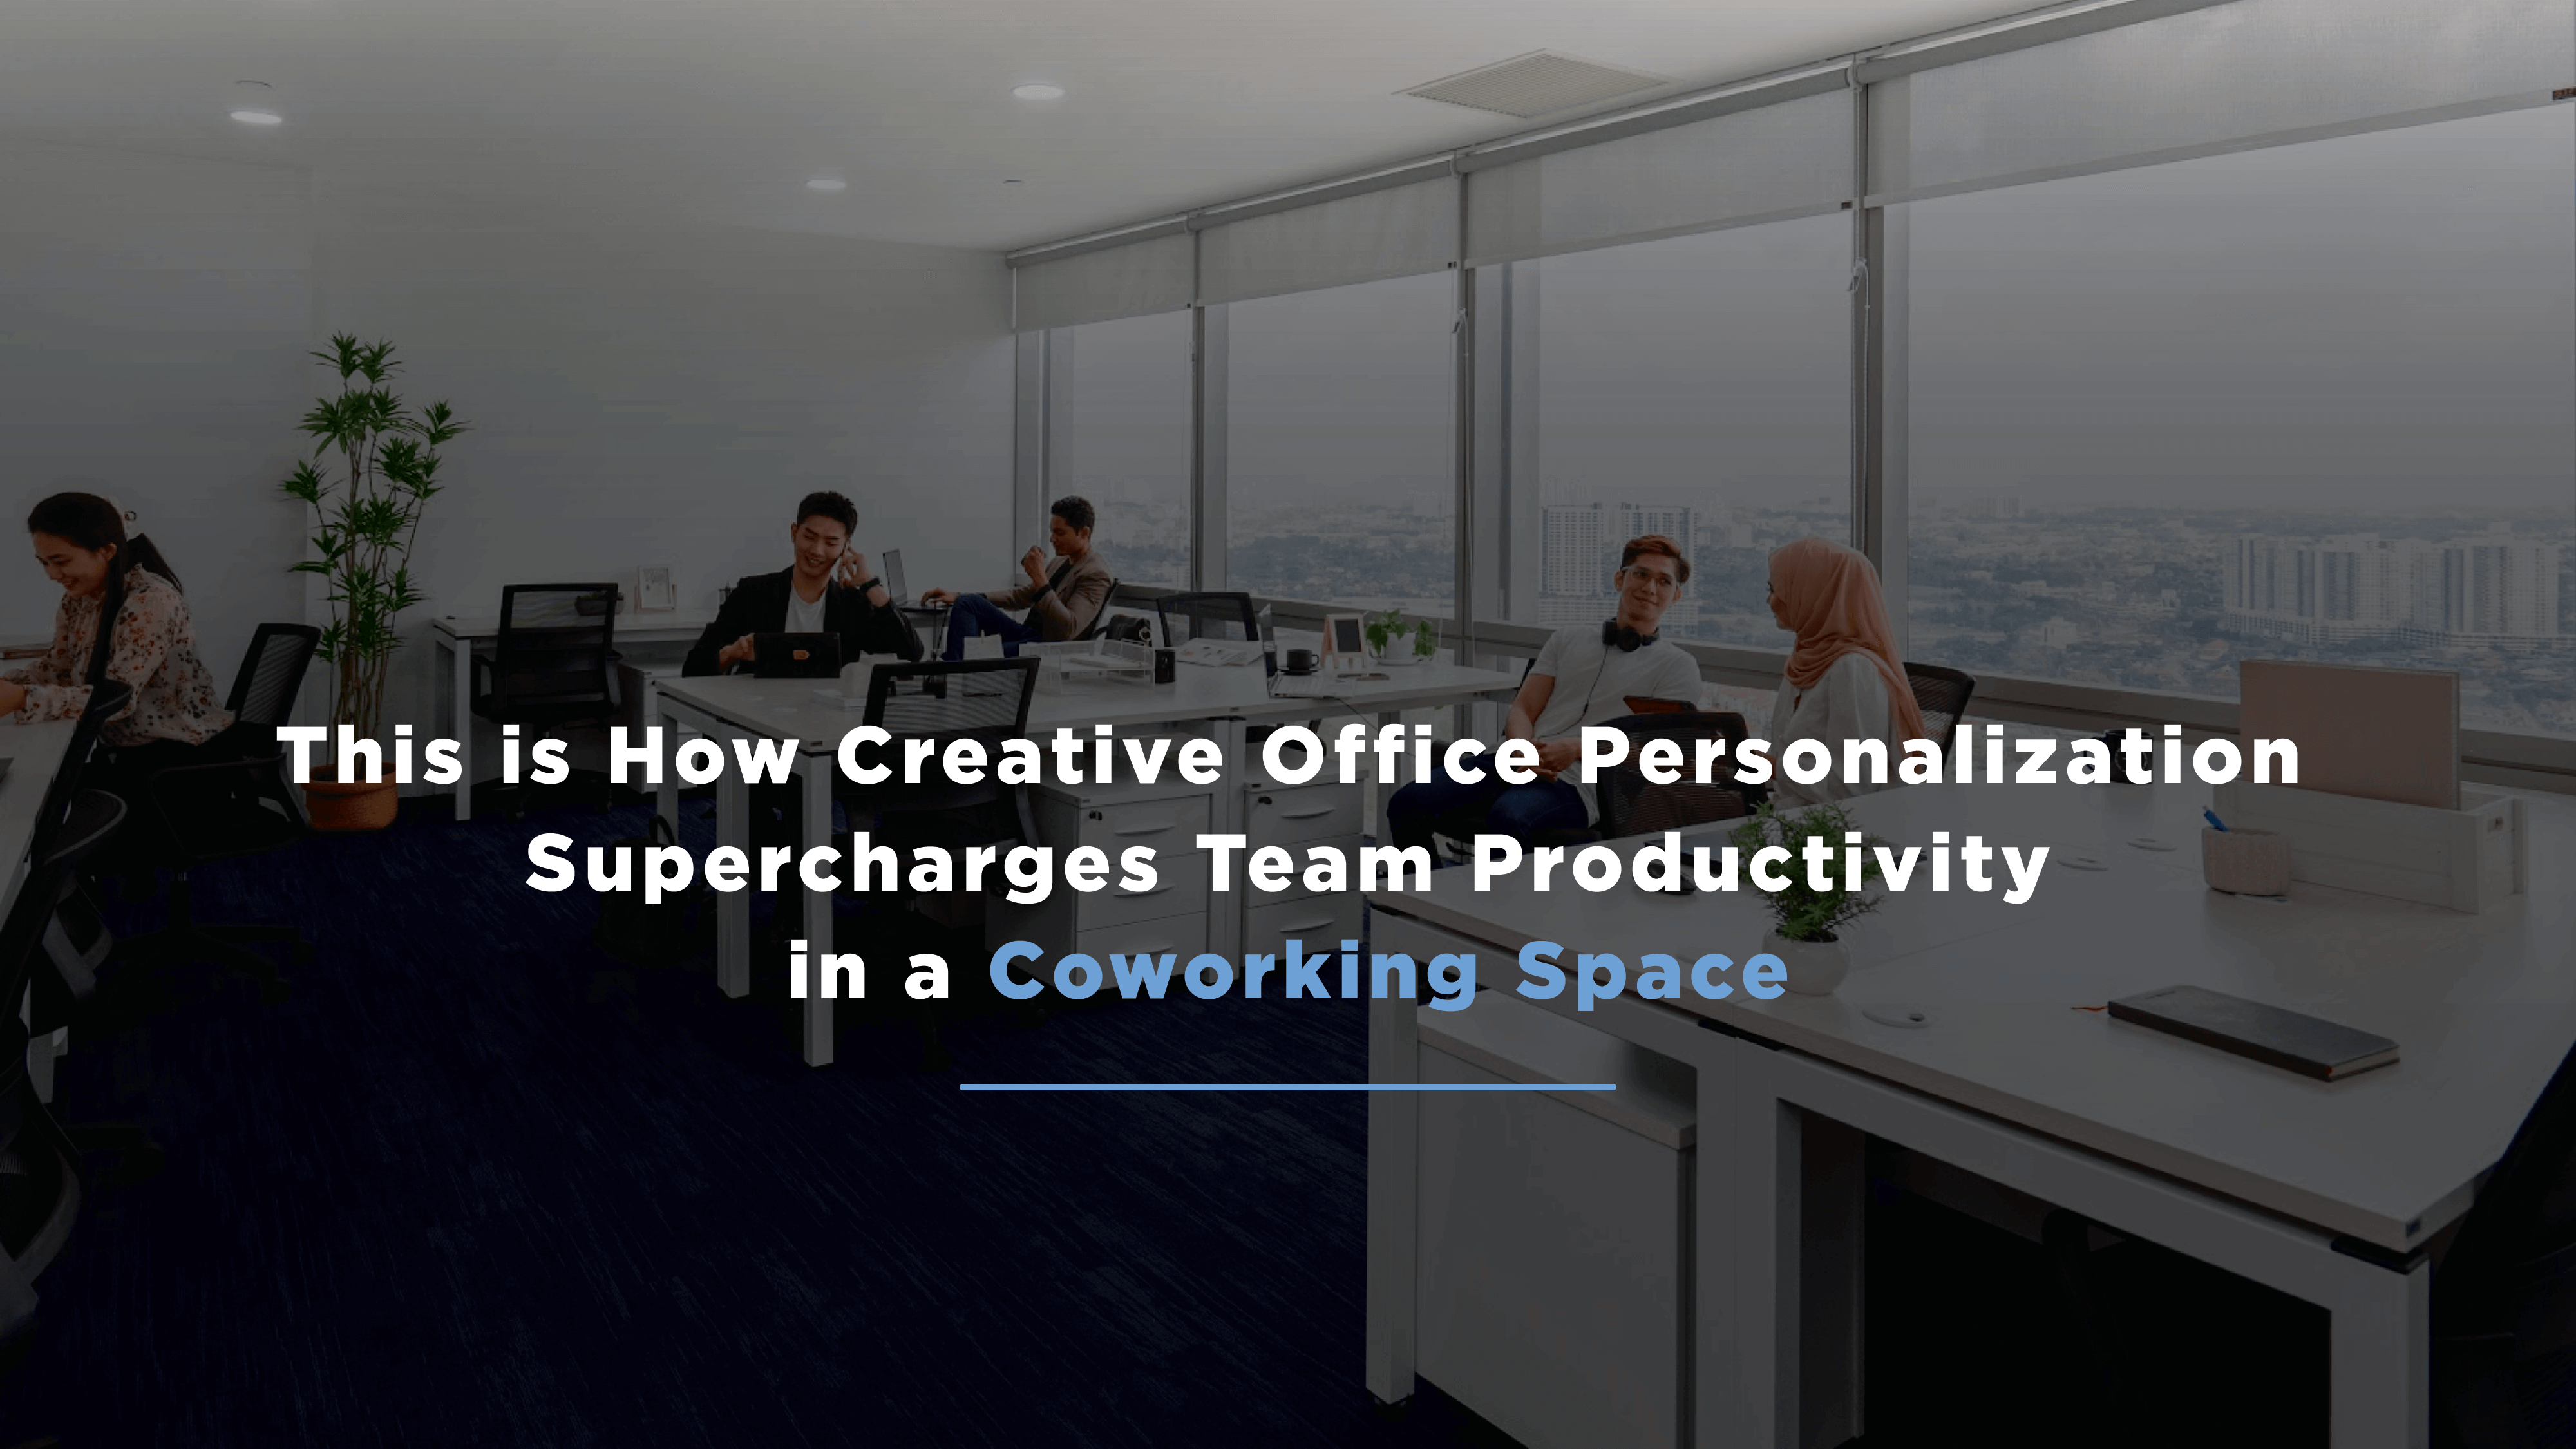 This is How Creative Office Personalization Supercharges Team Productivity in a Coworking Space